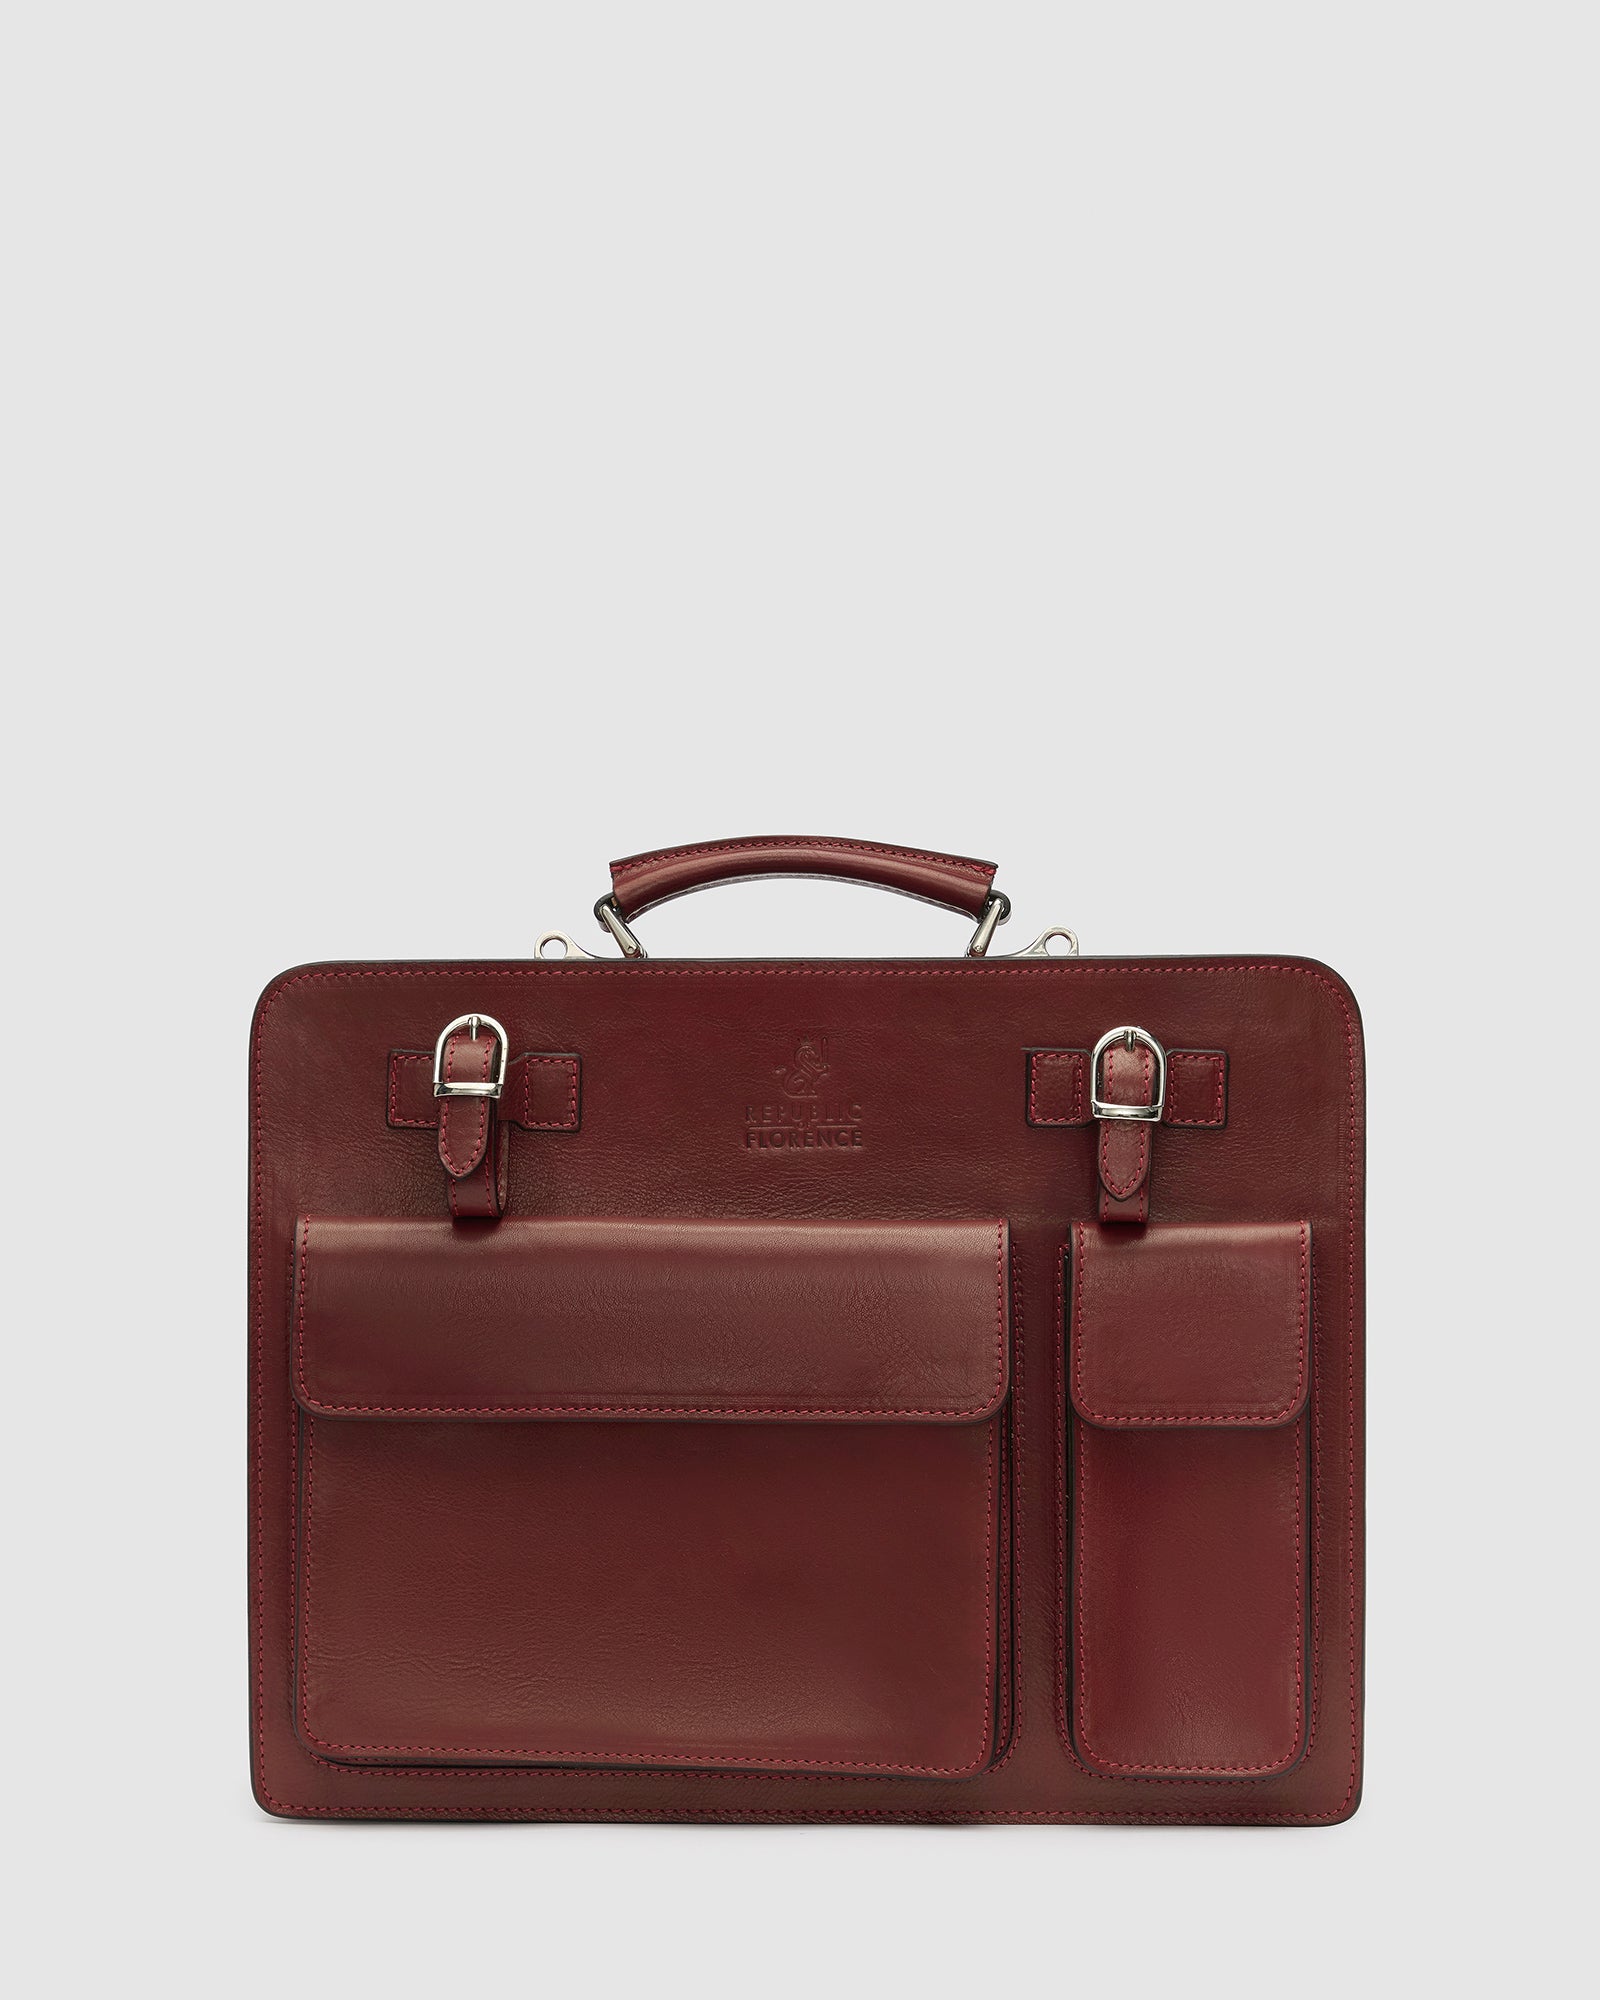 Munich Red - Double Compartment Leather Briefcase